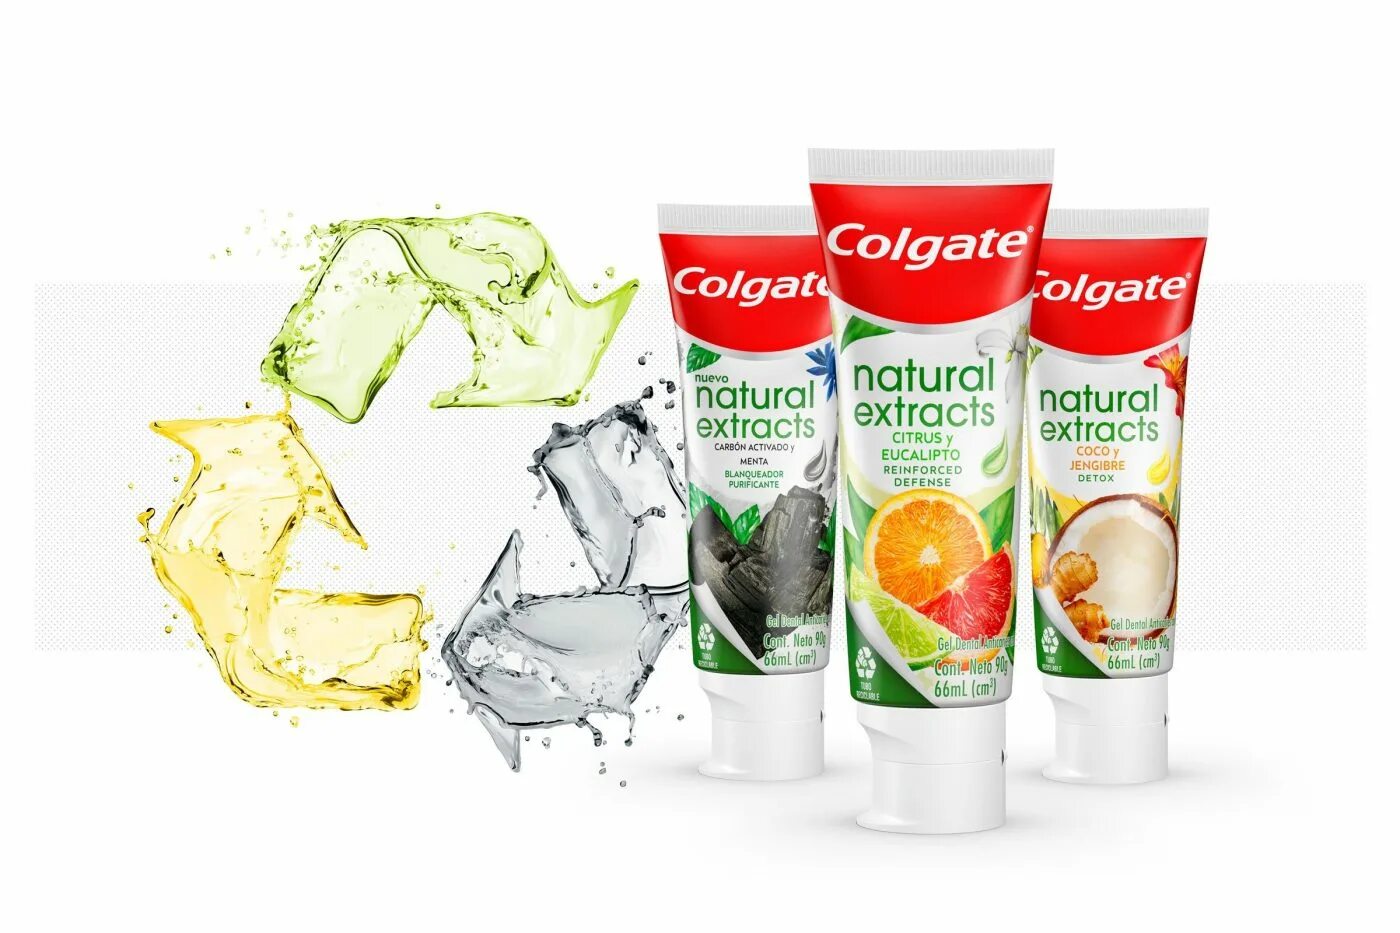 Natural extracts. Colgate. Колгейт цитрус. Colgate package. Colgate natural extracts Color.